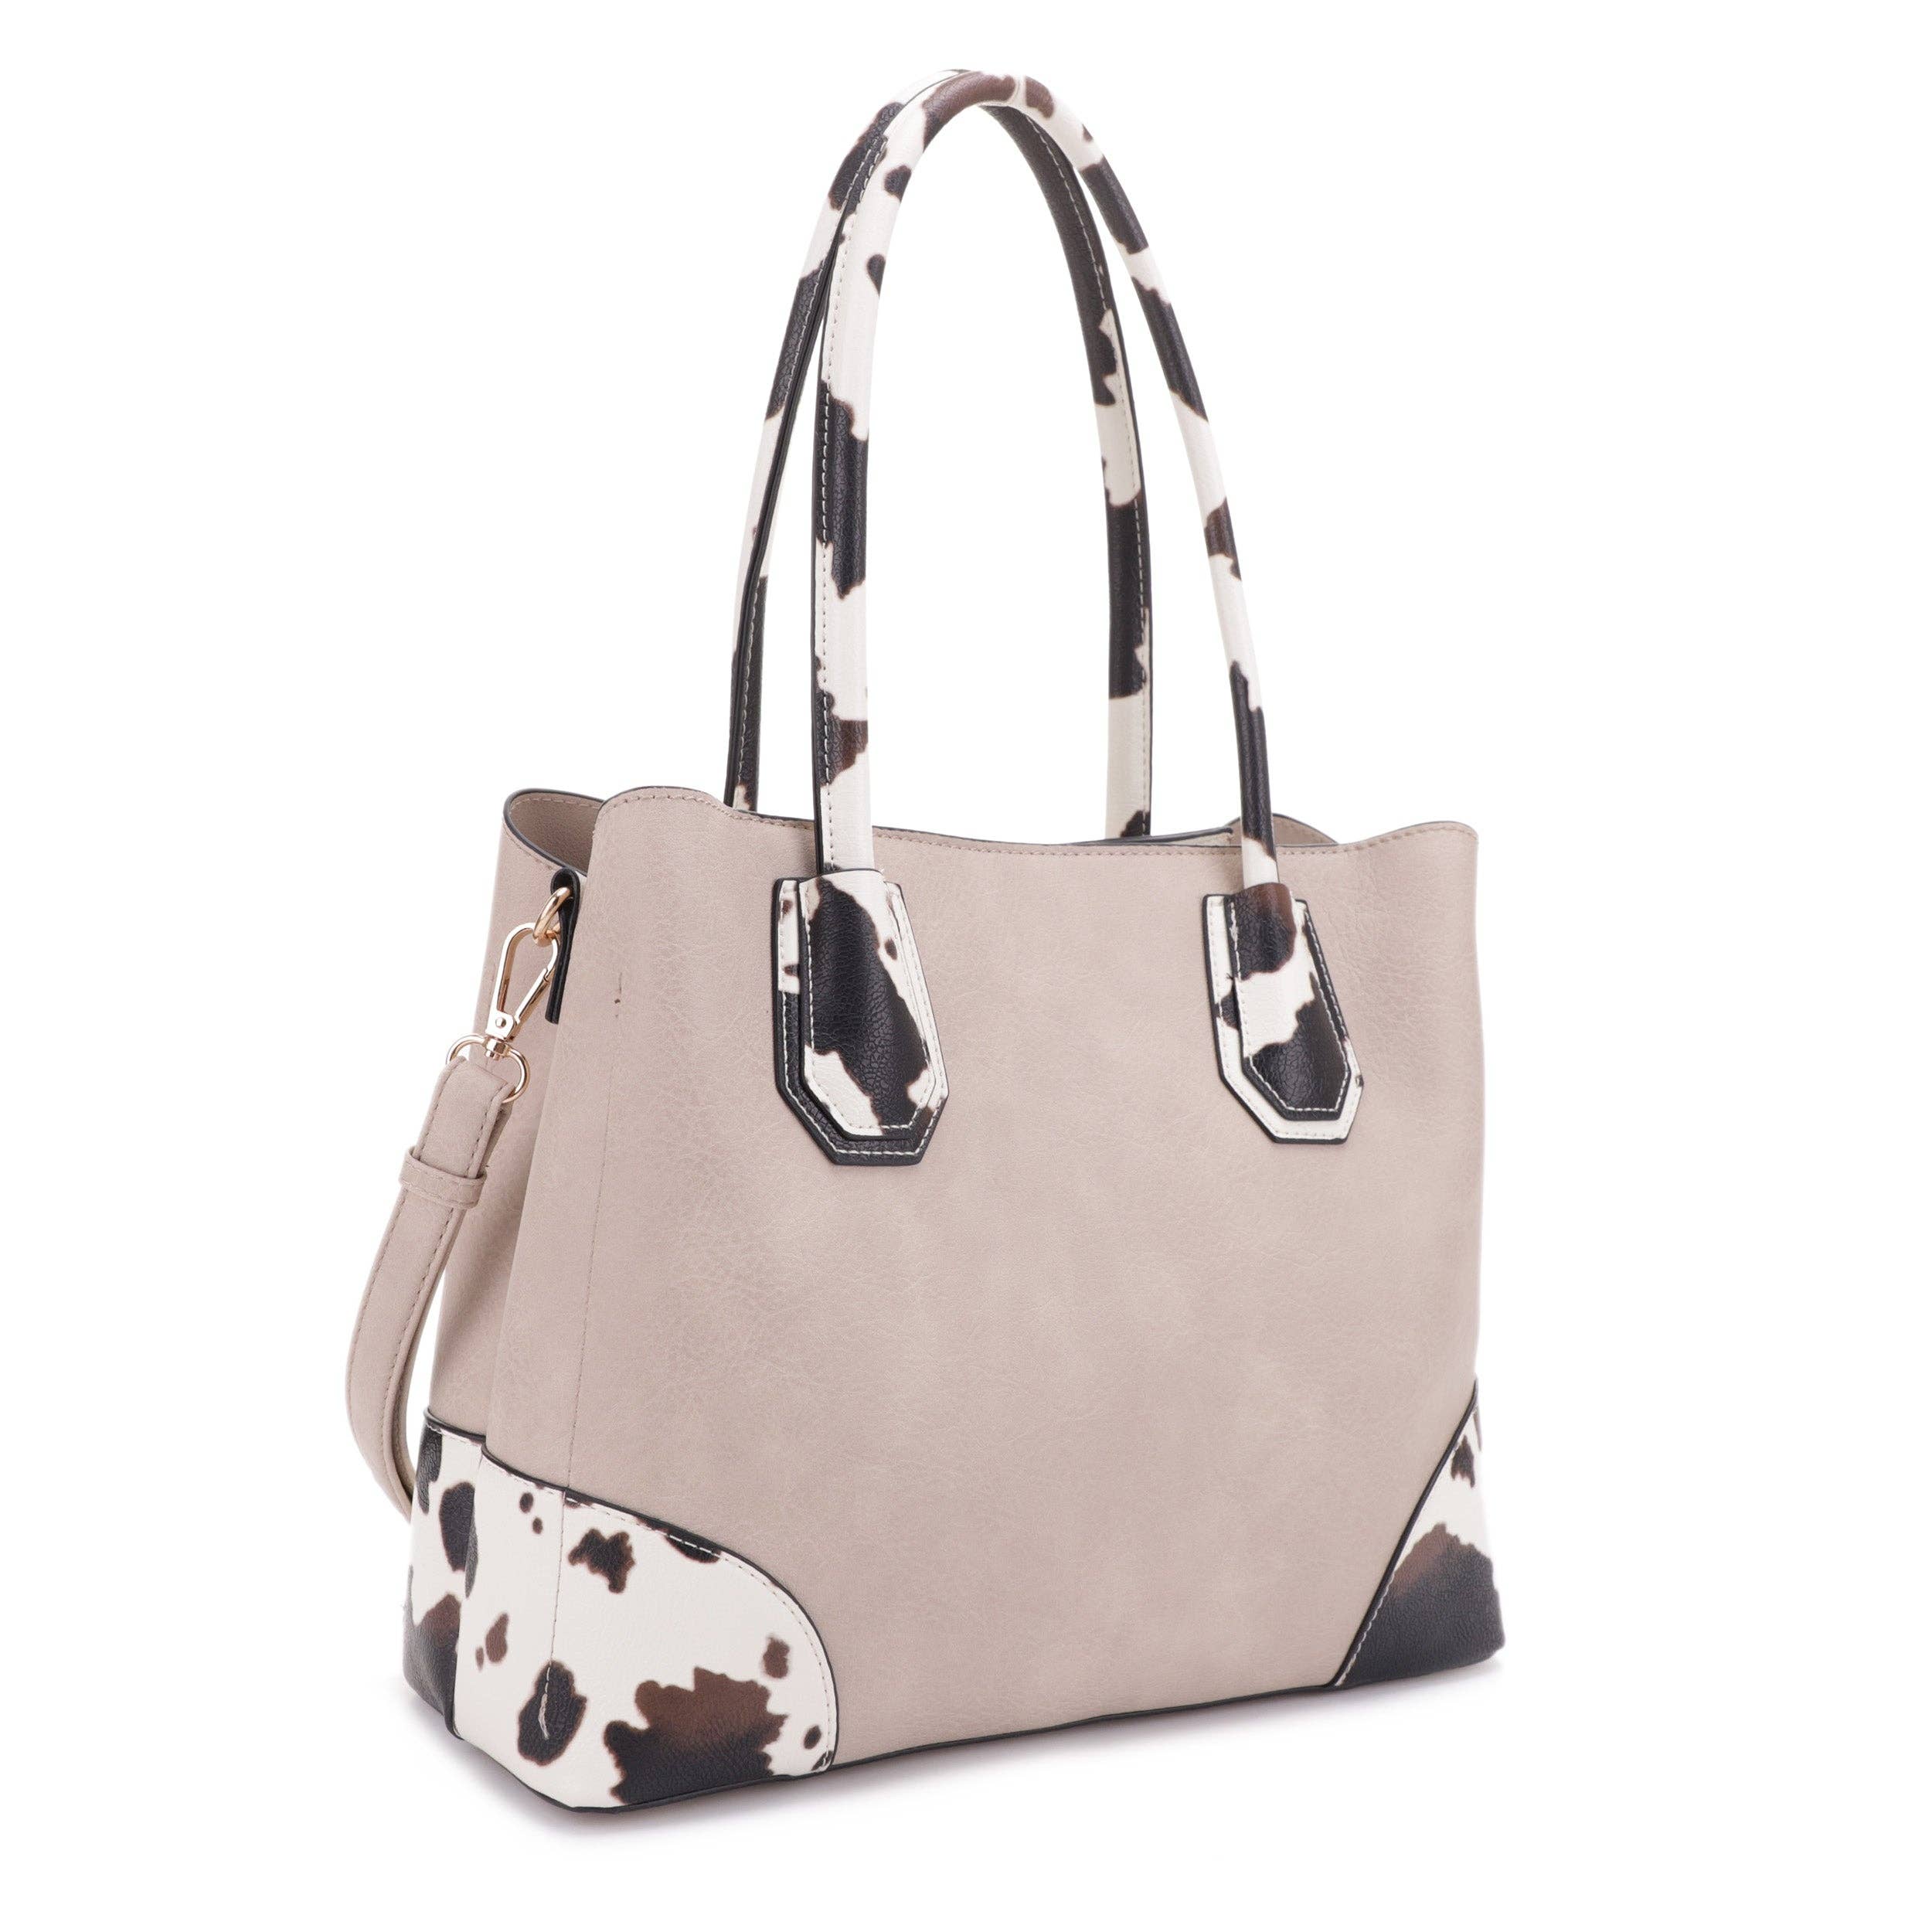 Beige Vegan Leather Handbag with Brown cow print accents and handles. 